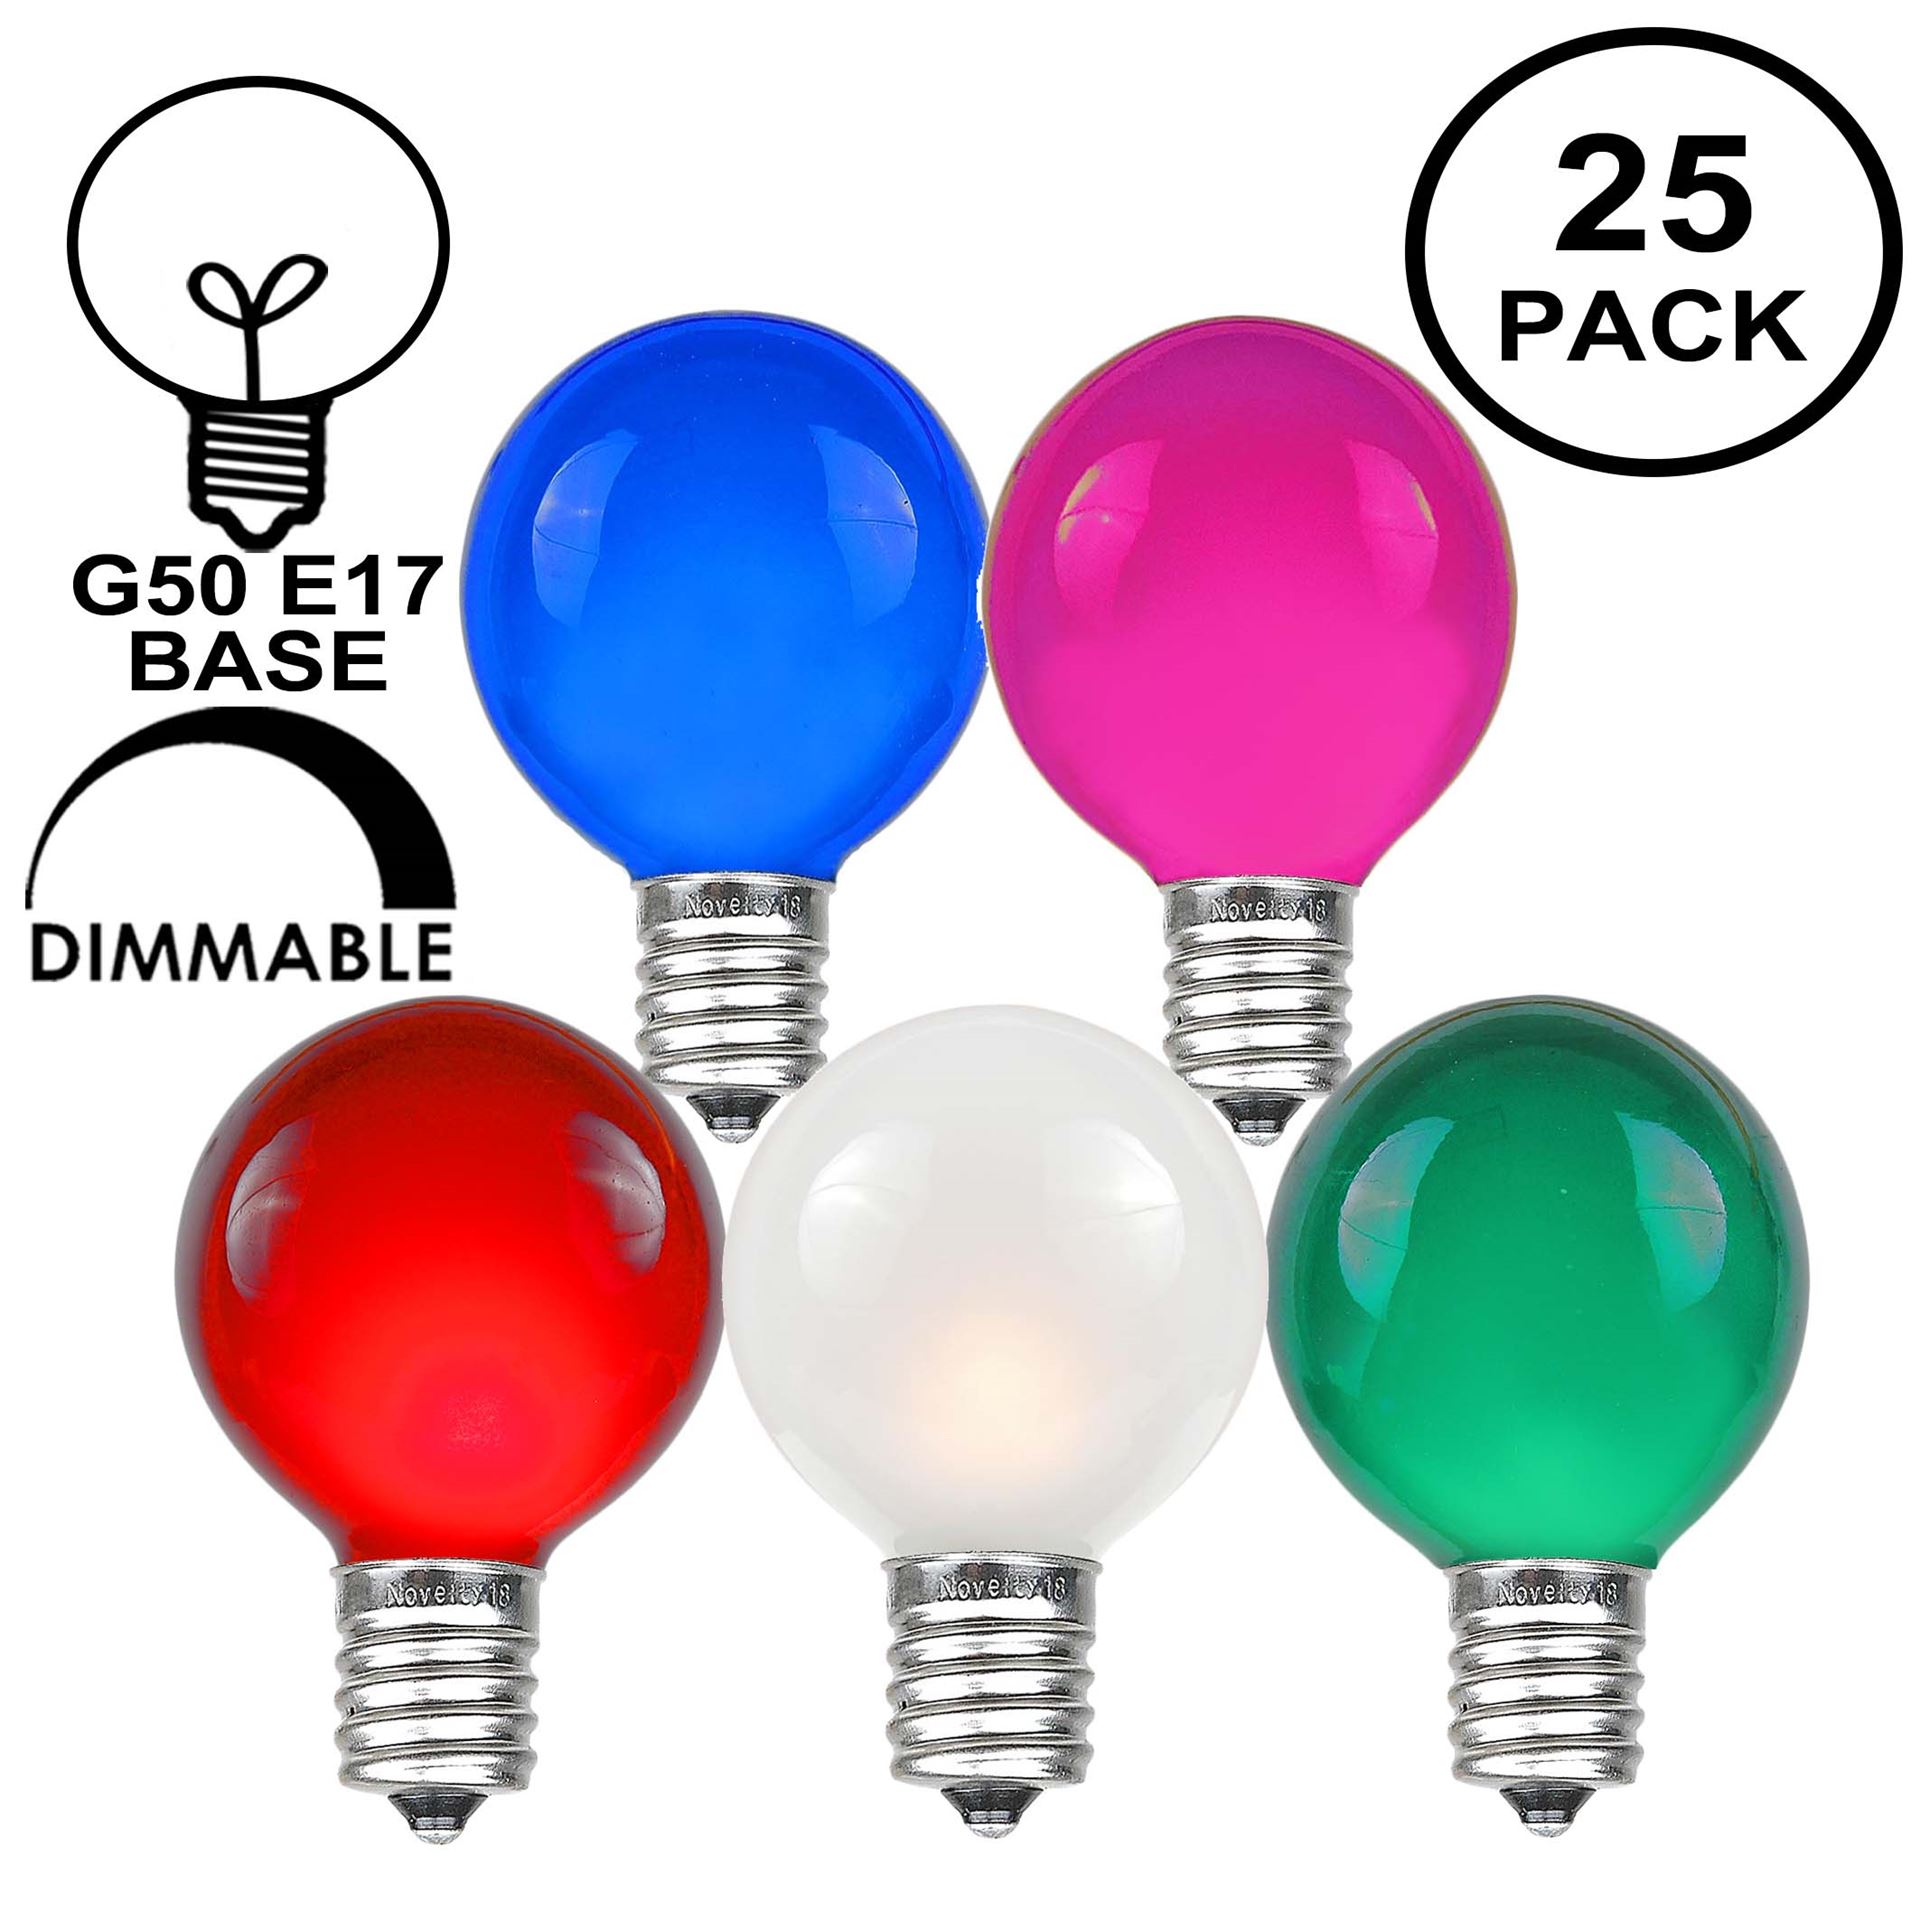 6 Boxes Novelty Lights G-50-CL 7 watt Clear Bulbs 25 Pack one price 